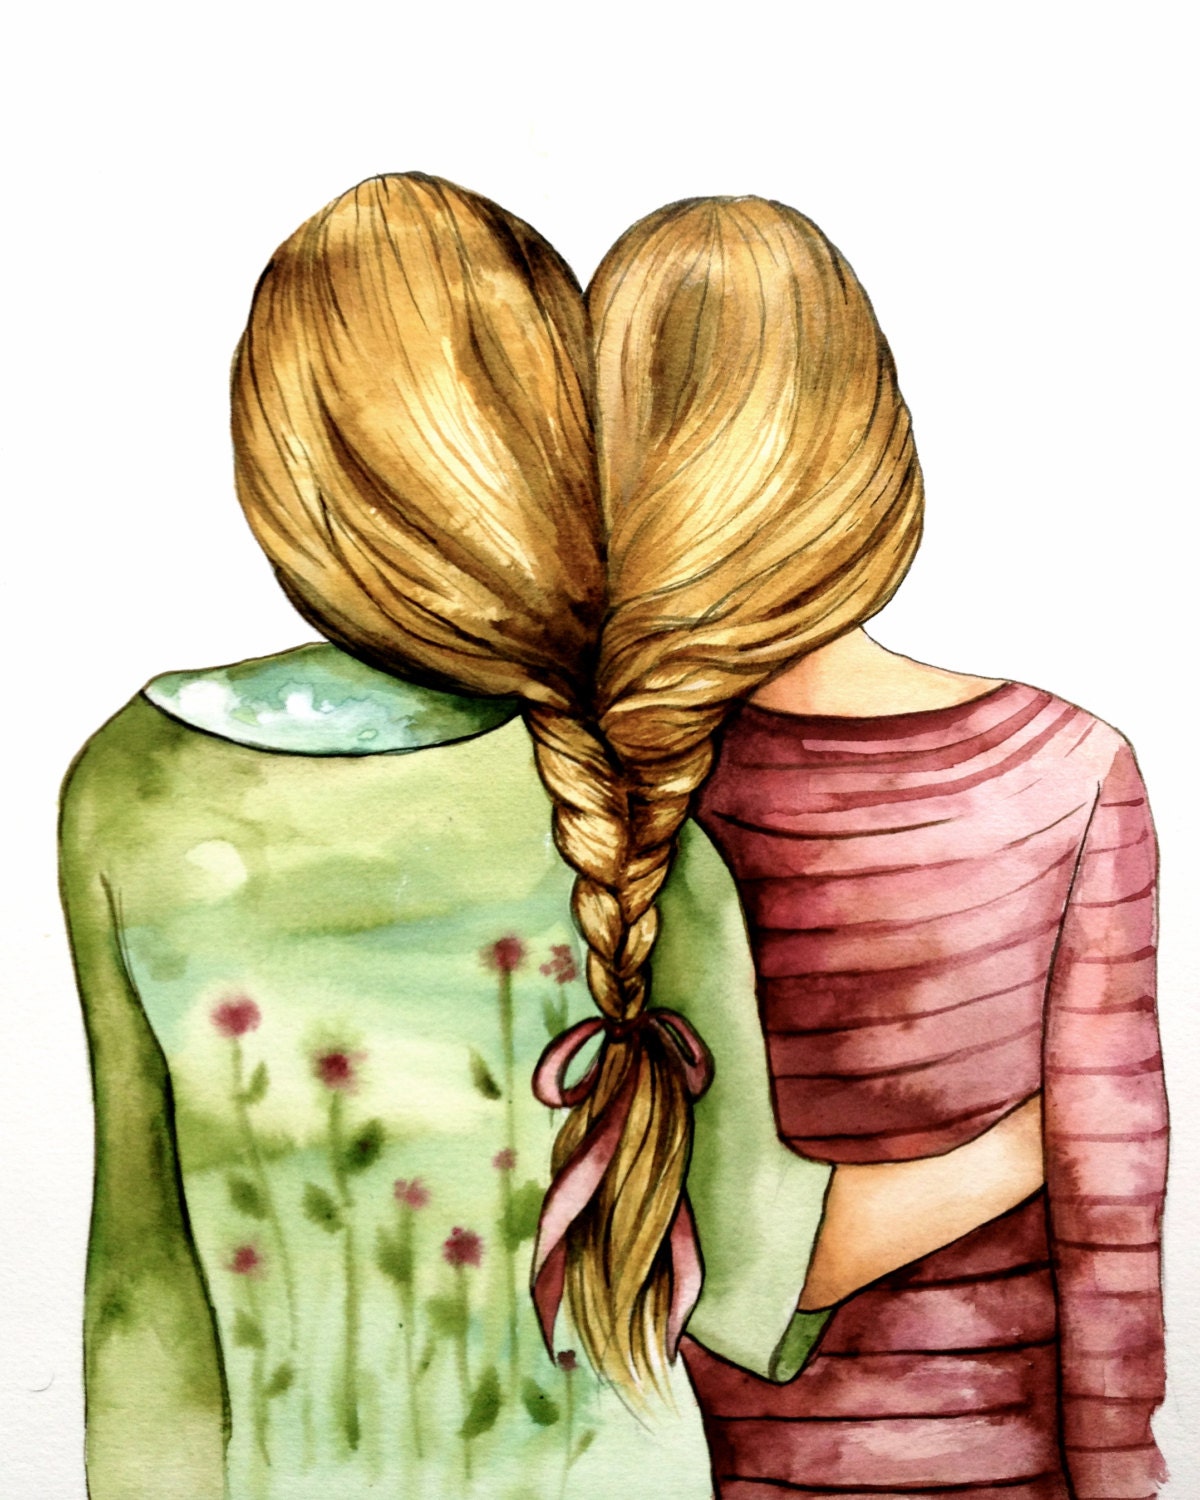 Two Sisters Best Friends With Blonde Hair Art Print 